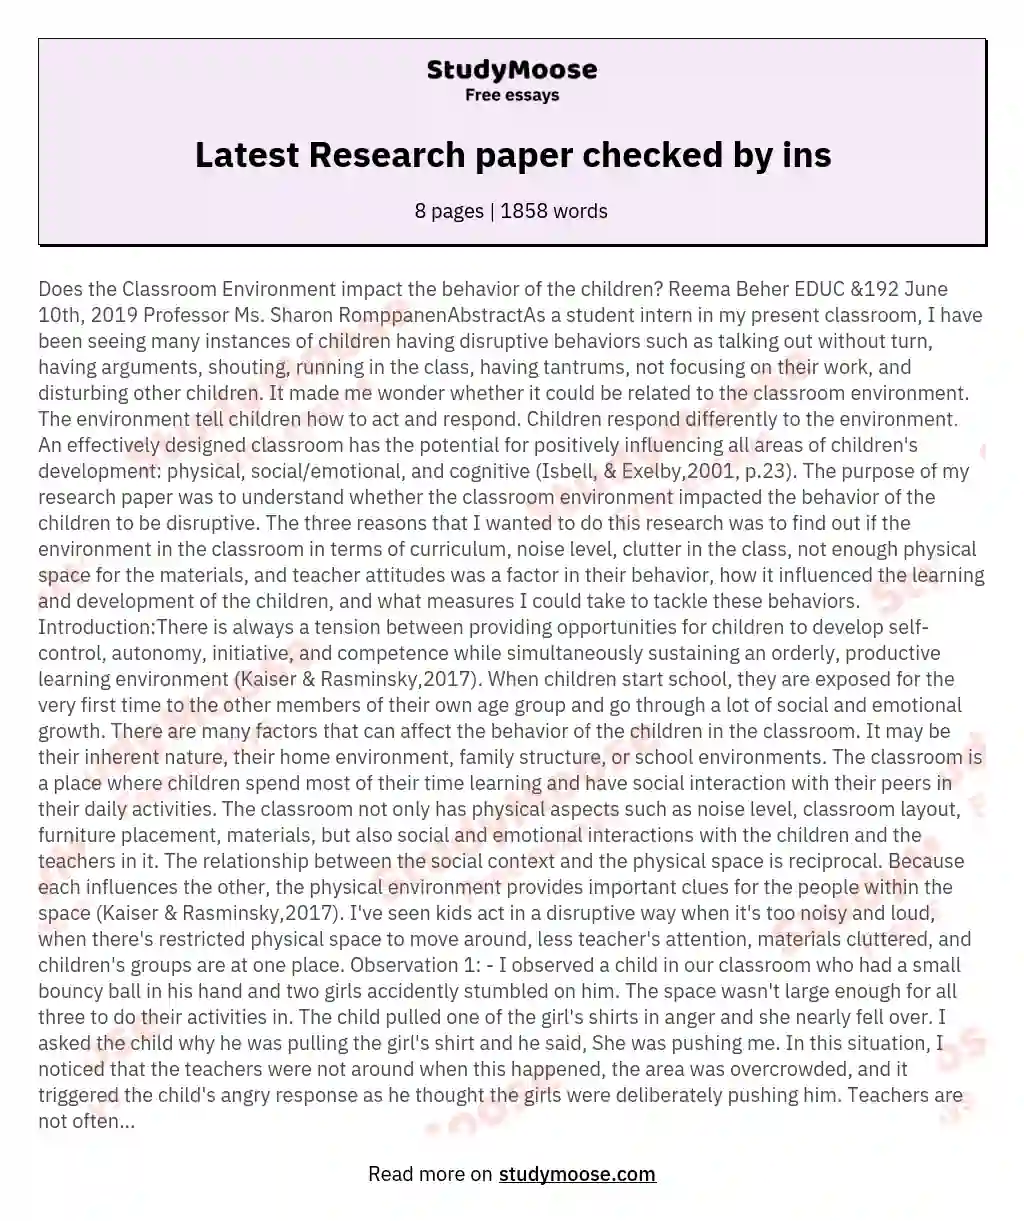 Latest Research paper checked by ins